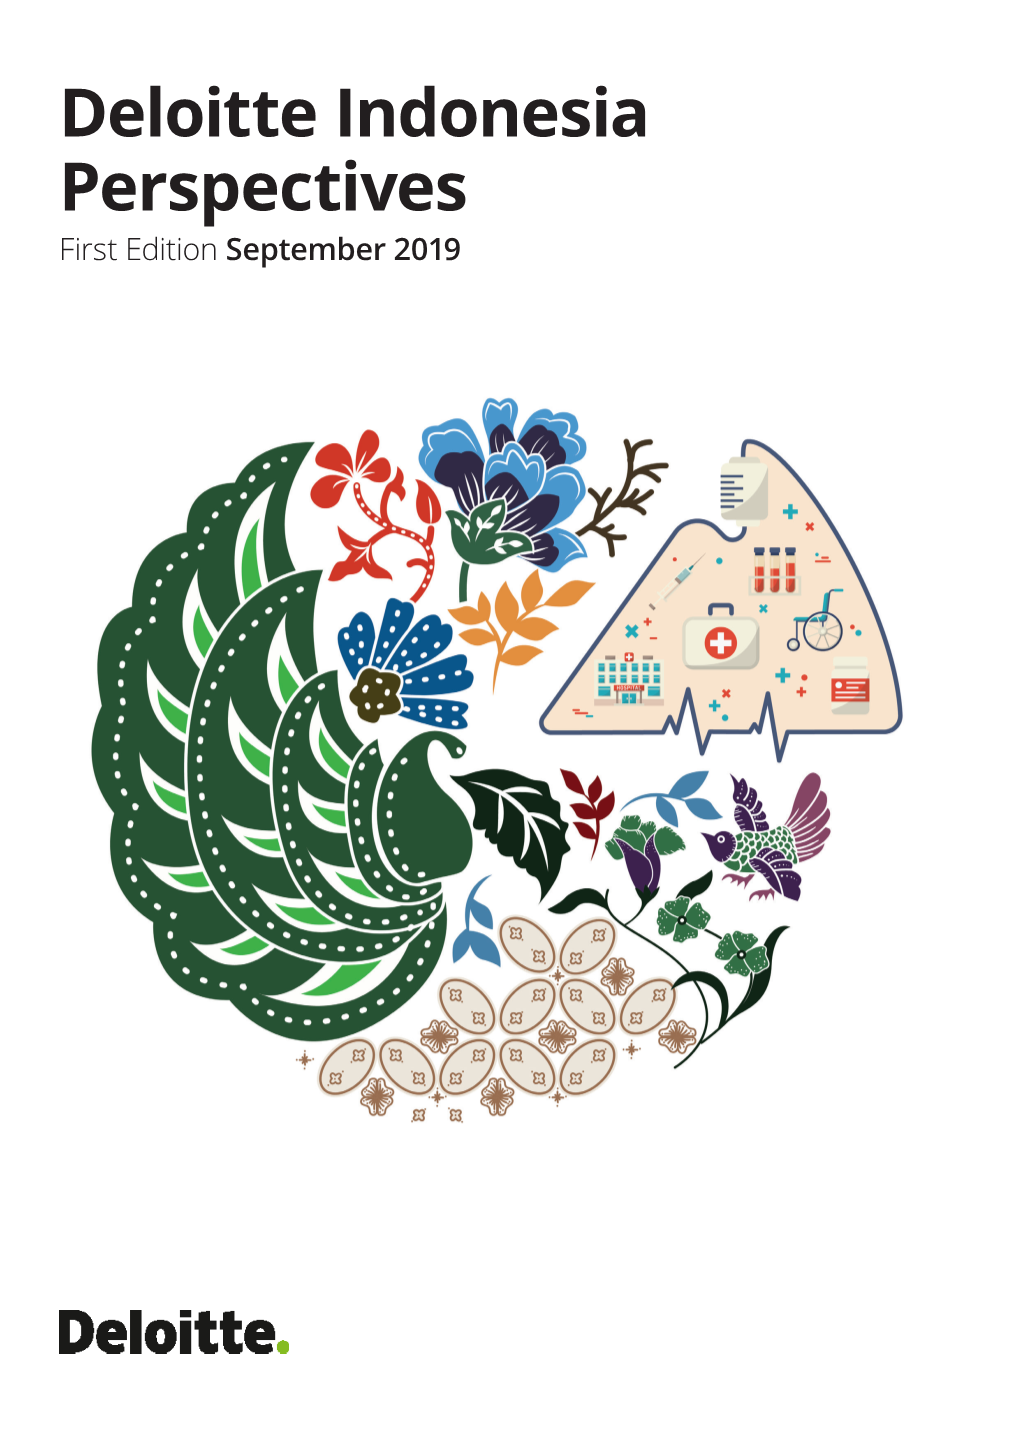 Deloitte Indonesia Perspectives First Edition September 2019 Deloitte Indonesia Perspectives | First Edition, September 2019